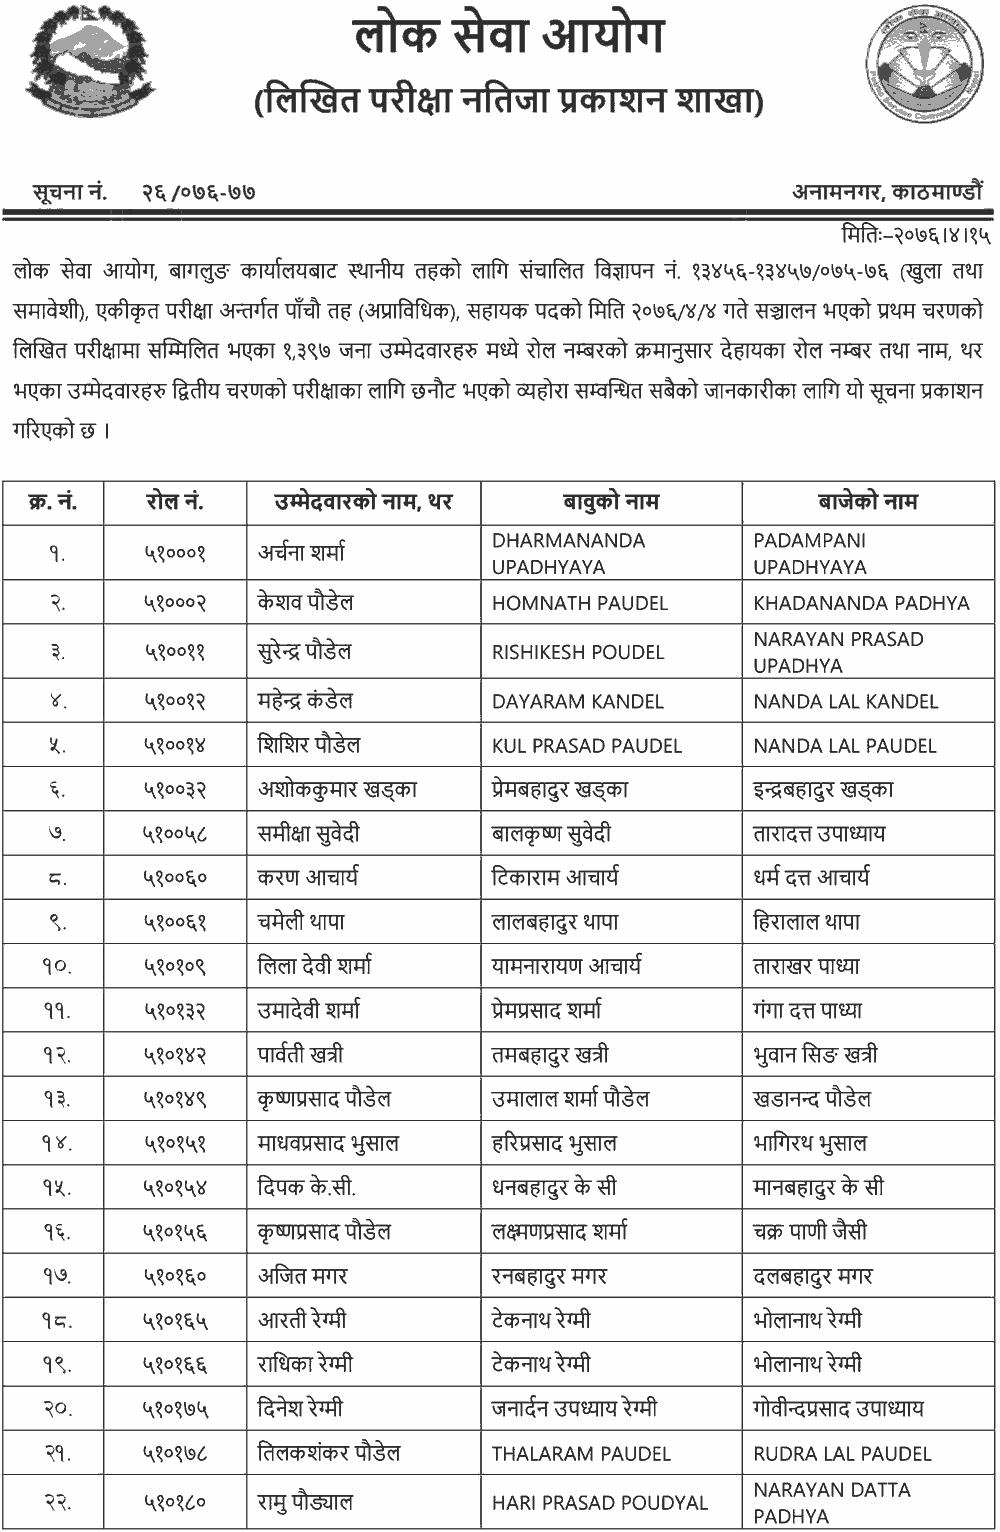 Local Level Non-Technical 5th Level  Written Exam Result - Baglung